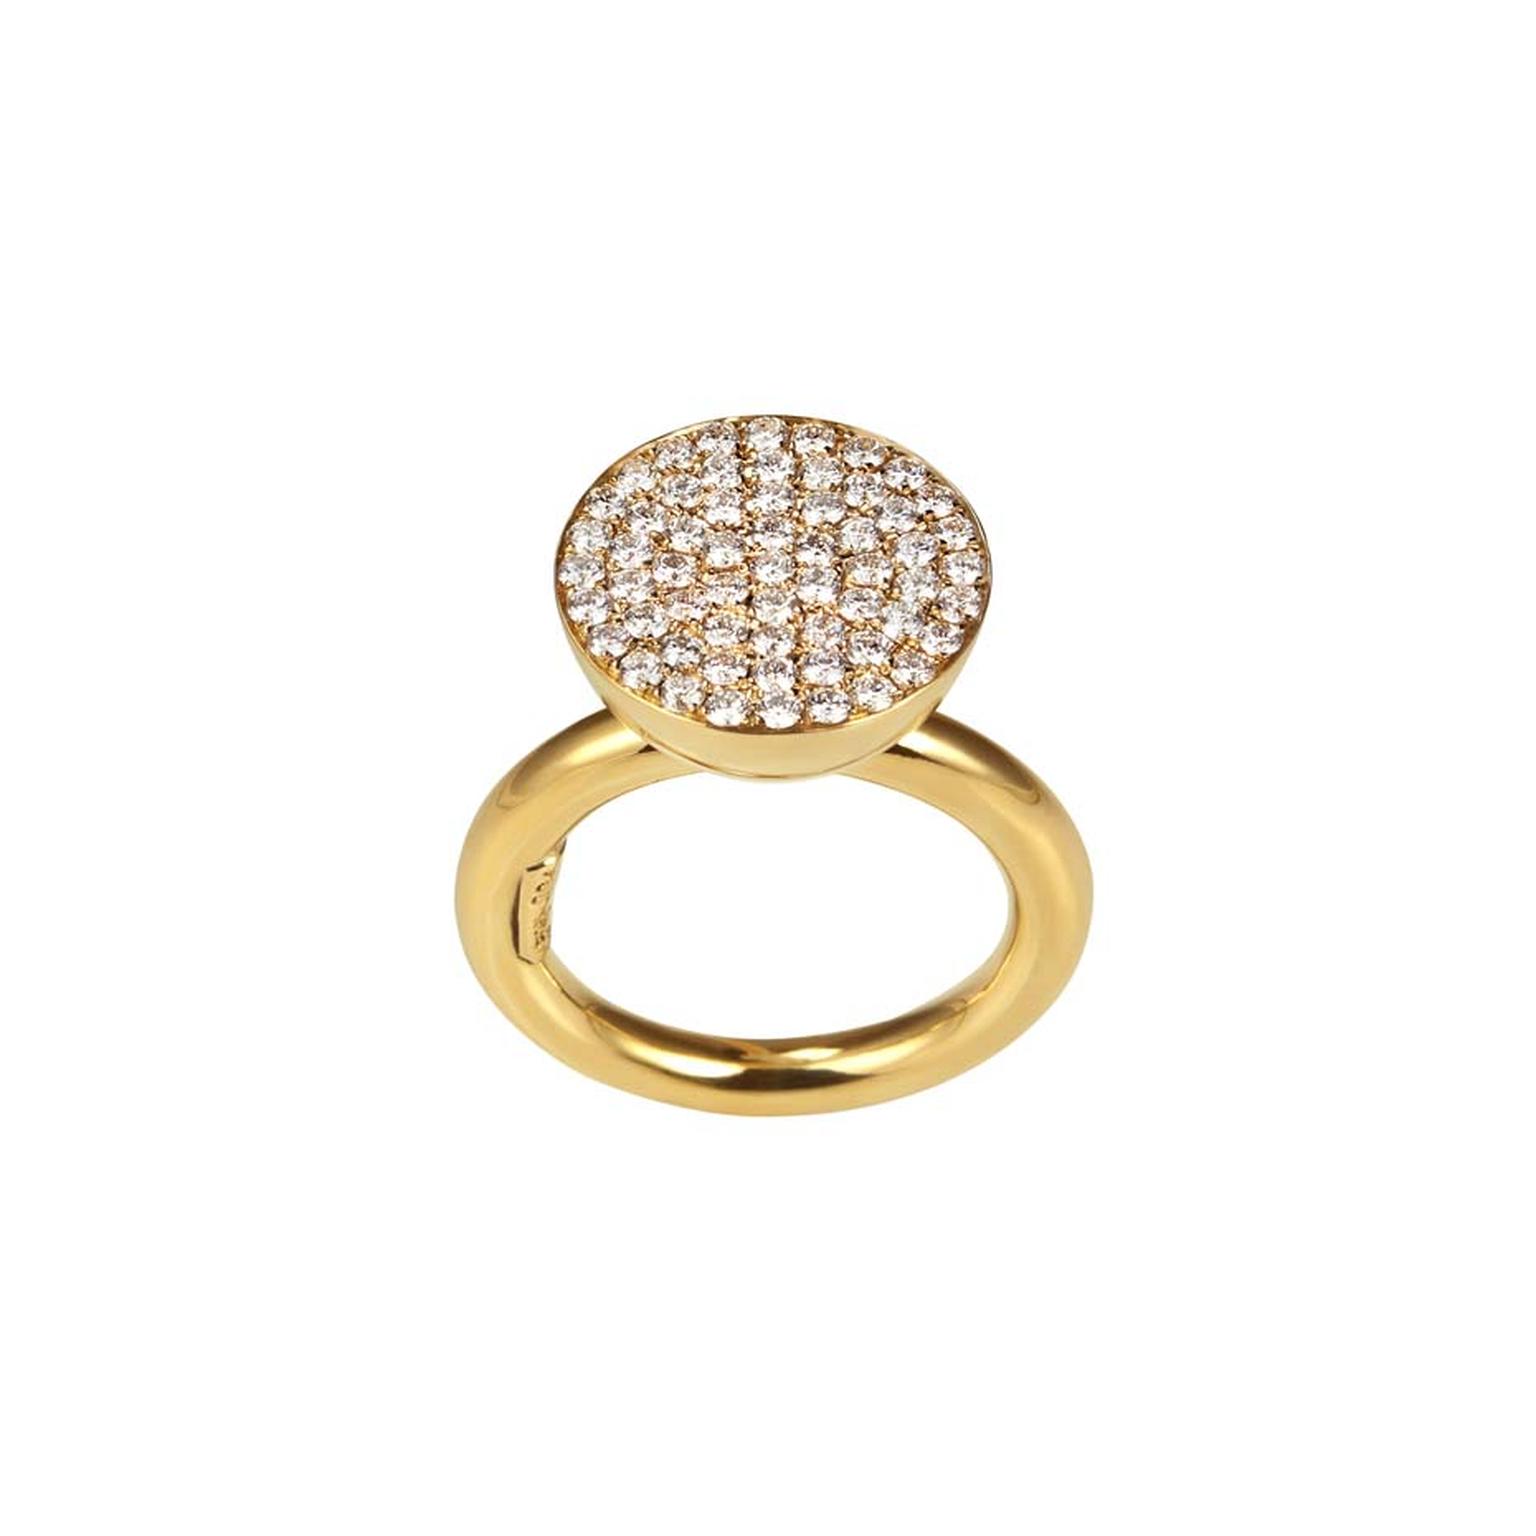 The yellow gold and diamond Elena Votsi Light and Shadow 11mm ring